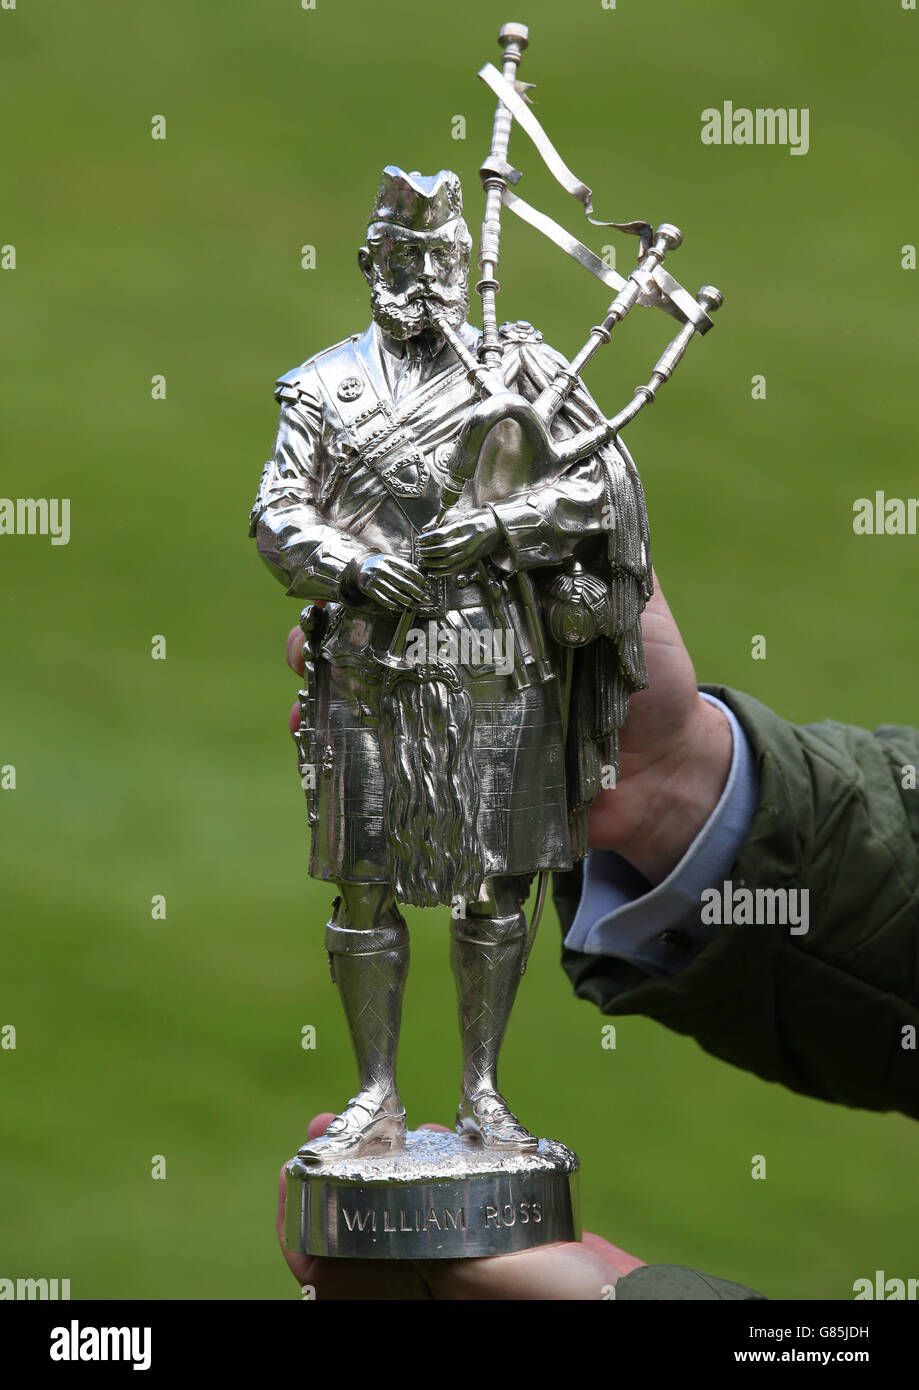 Richard Gledson holds a Silver on Bronze by Boehm of William Ross, as the BBC Antiques Roadshow films at Balmoral Castle, Scotland. Stock Photo